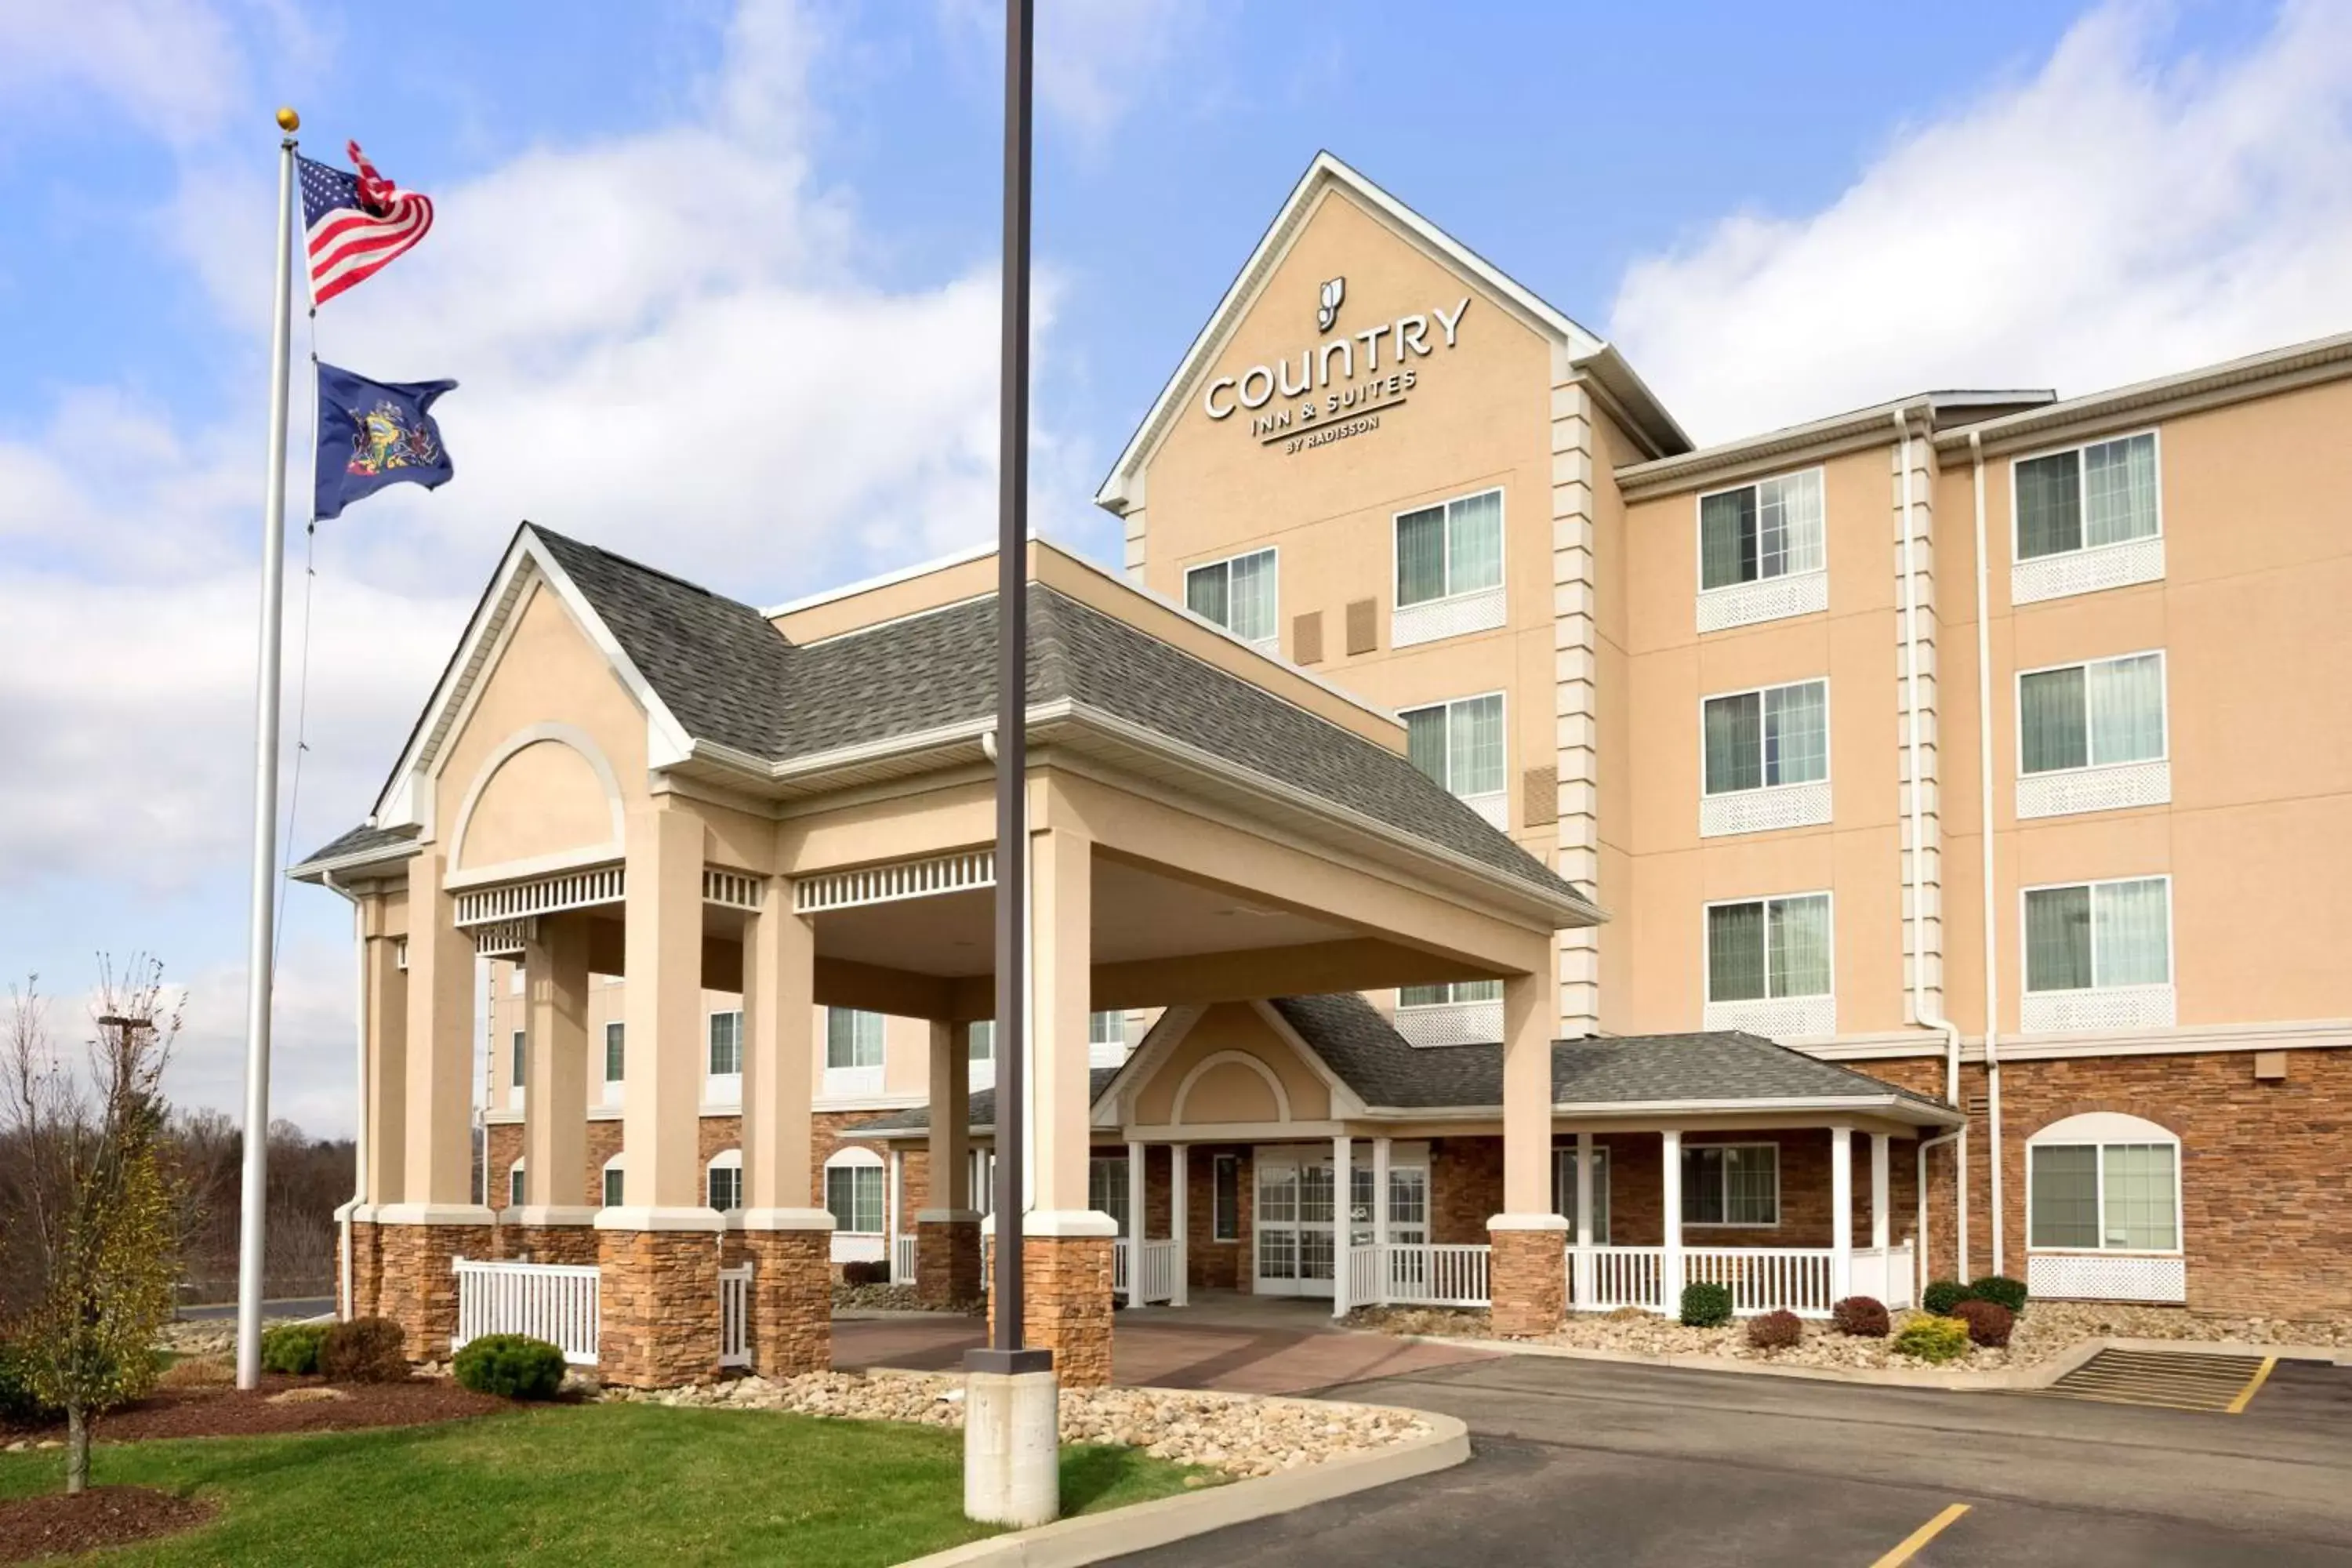 Property building in Country Inn & Suites by Radisson, Washington at Meadowlands, PA